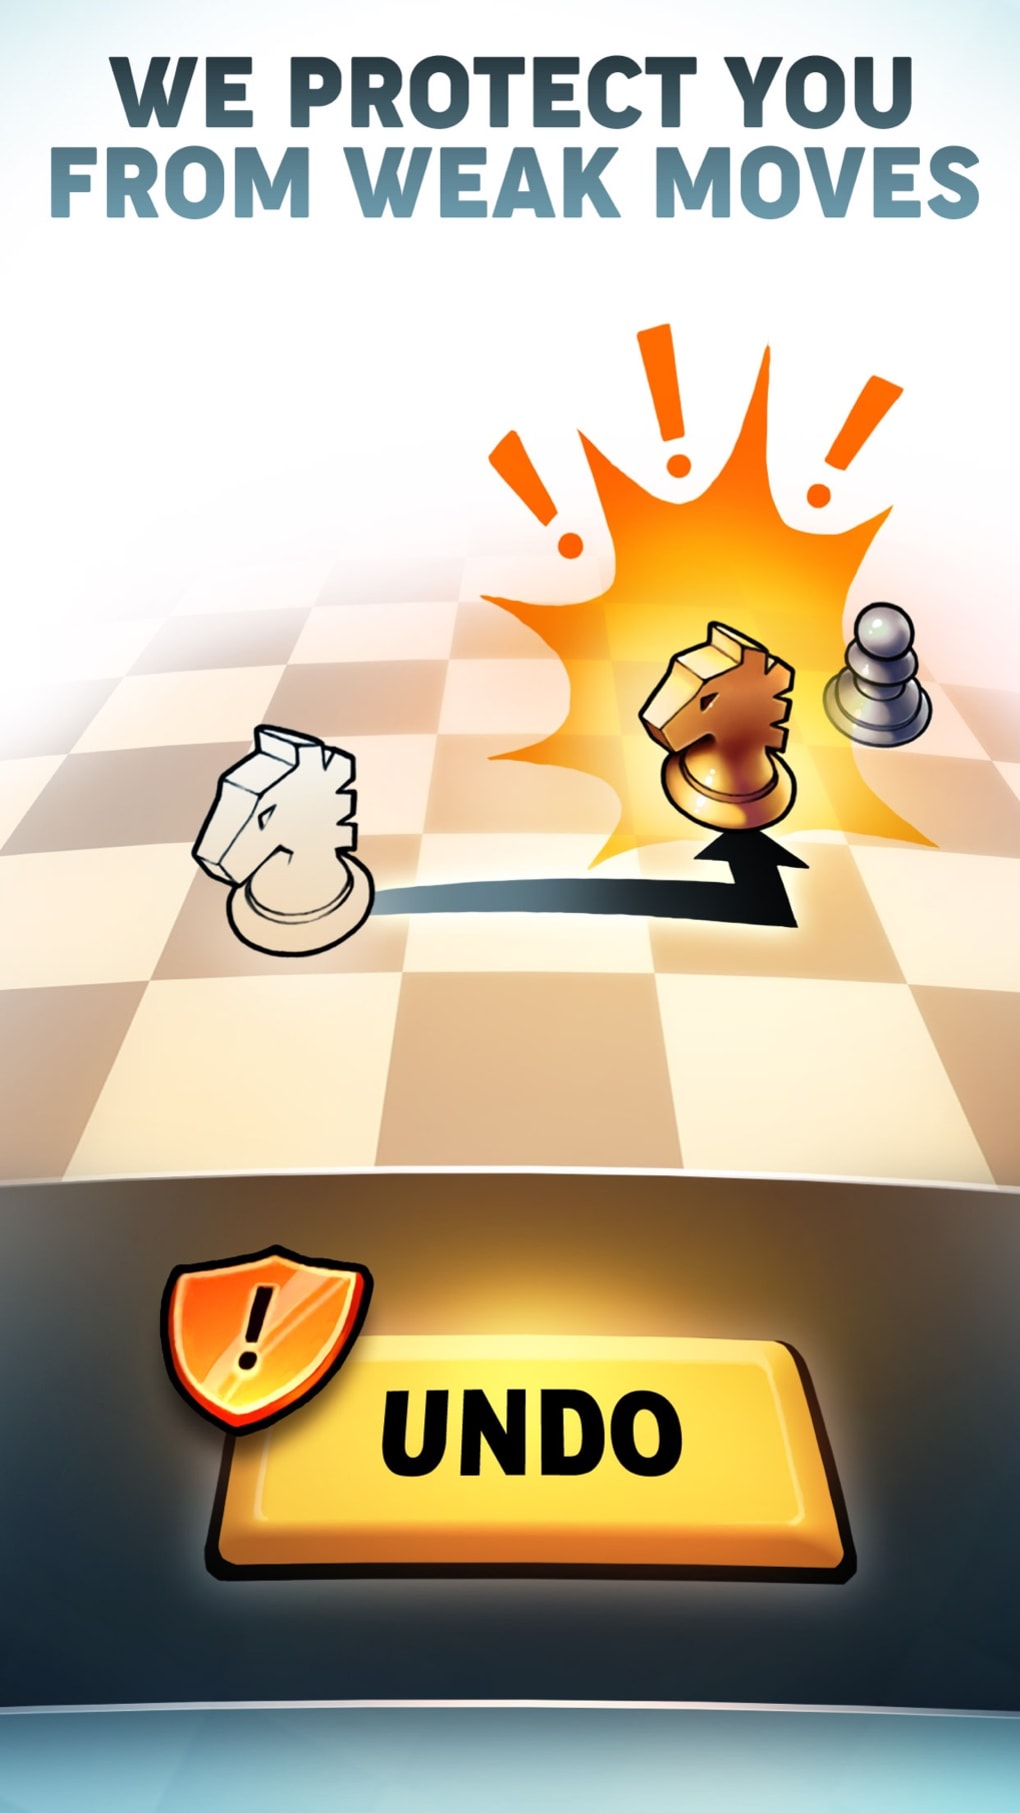 Chess Universe - online games para iPhone - Download